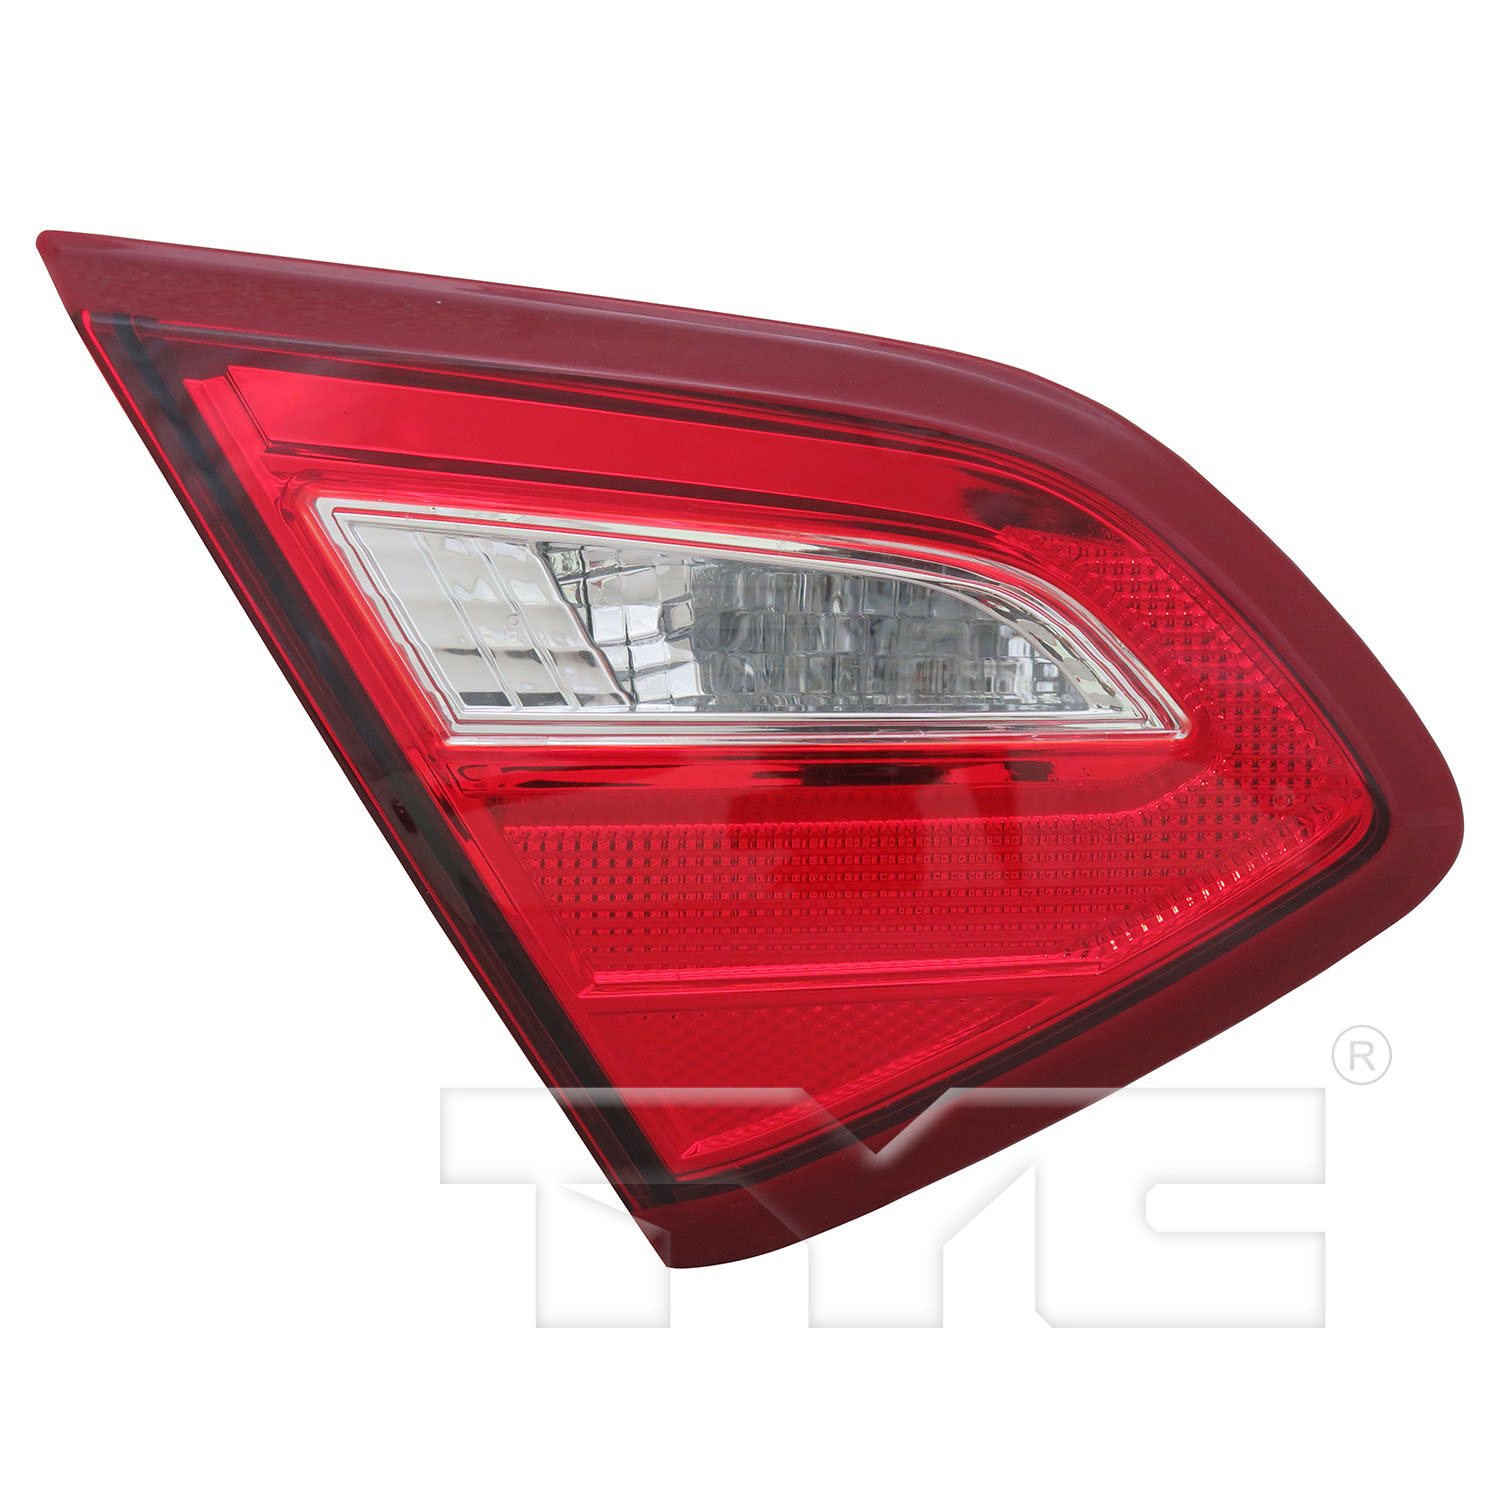 Aftermarket TAILLIGHTS for NISSAN - ALTIMA, ALTIMA,16-17,LT Taillamp assy inner